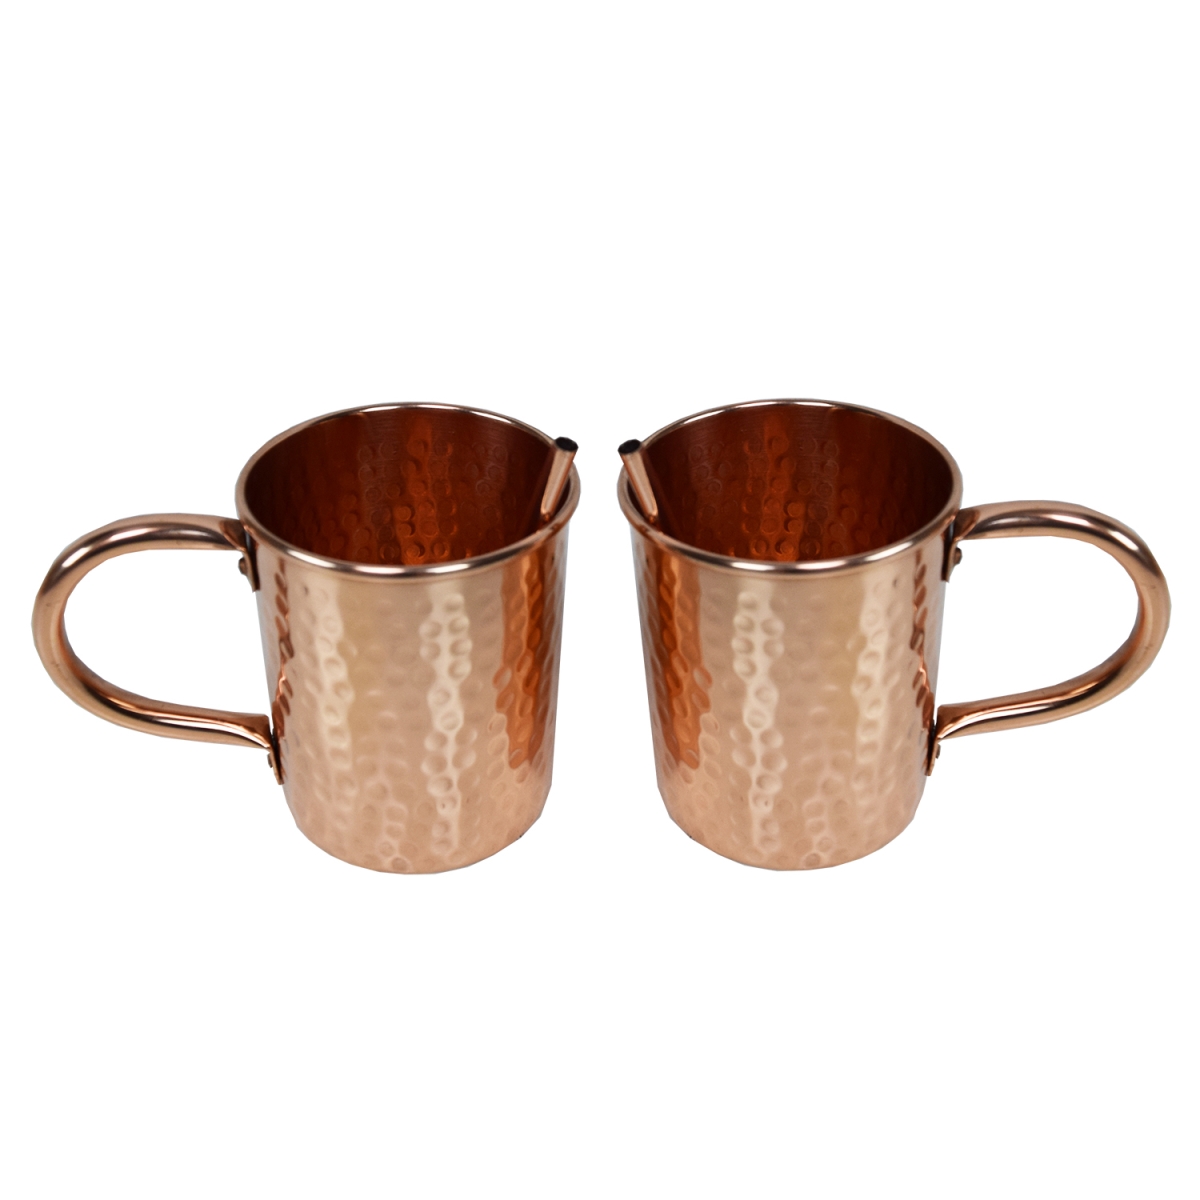 Oakland Living 16 Oz Solid Straight Pair Of 100 Percent Moscow Mule Mug Cups With Two Copper Straws Hammered Handcrafted, Copper